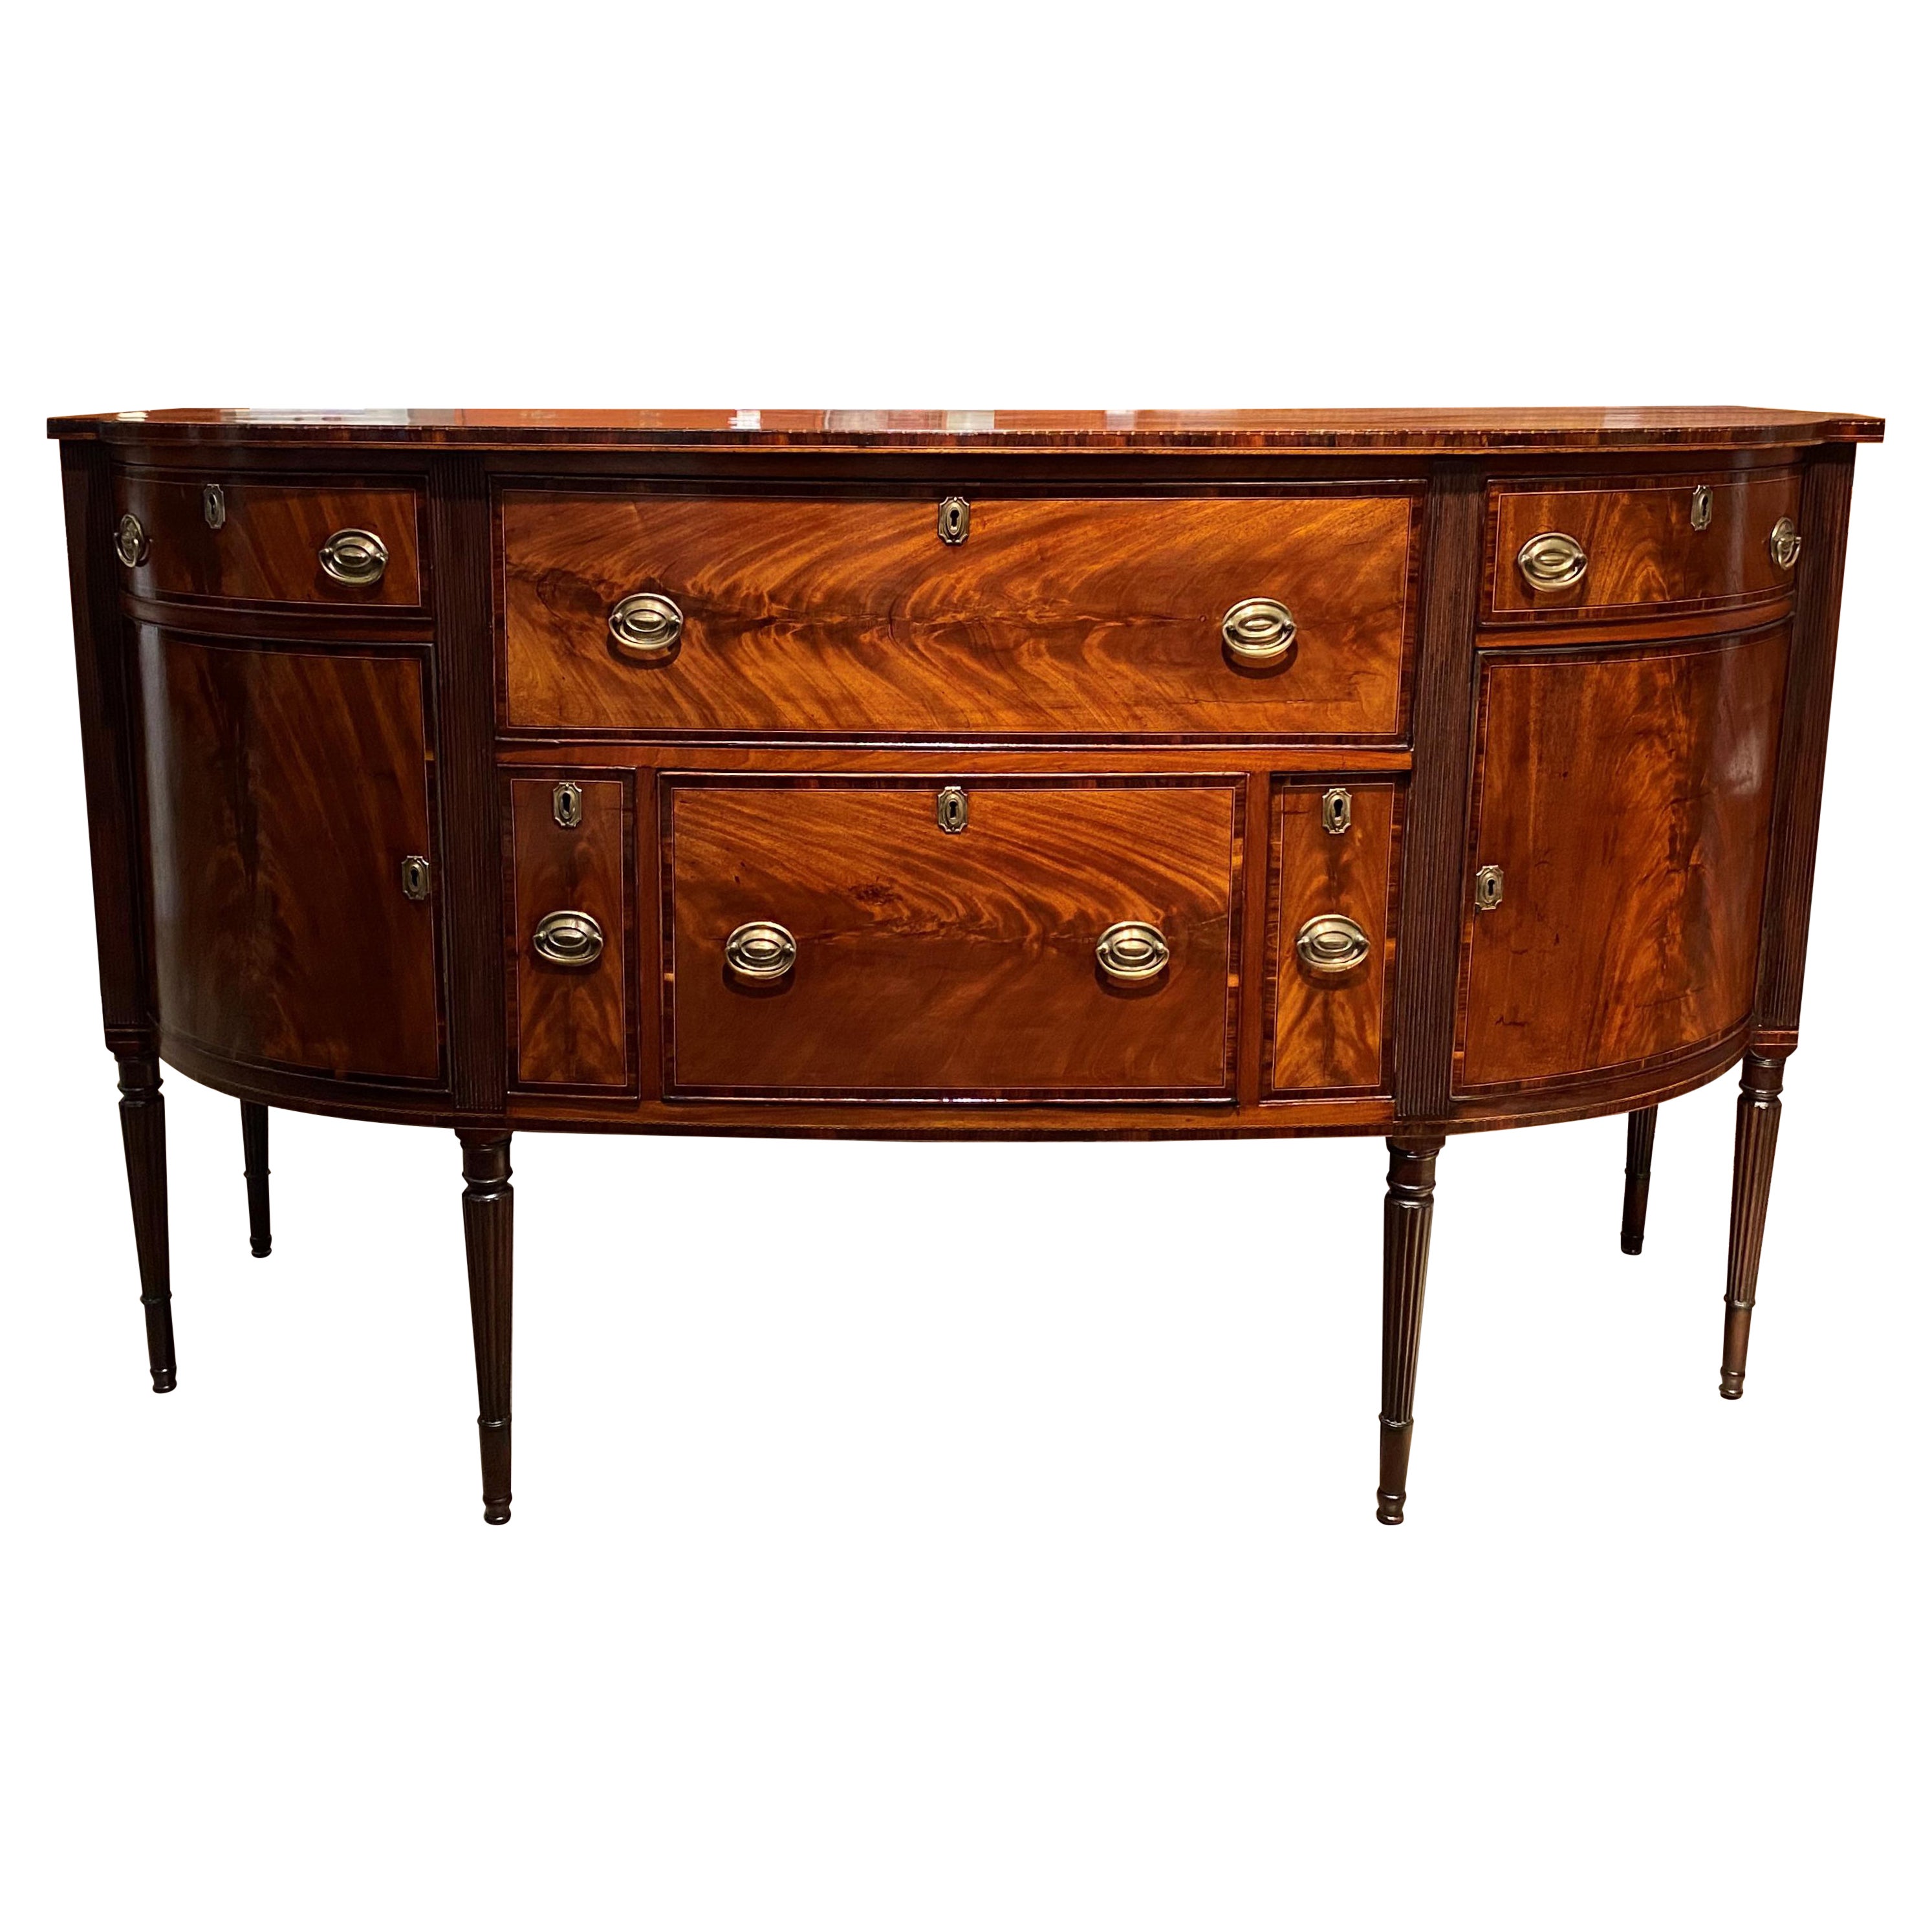 Federal Boston Mahogany Sideboard Attributed to the Seymour Workshop